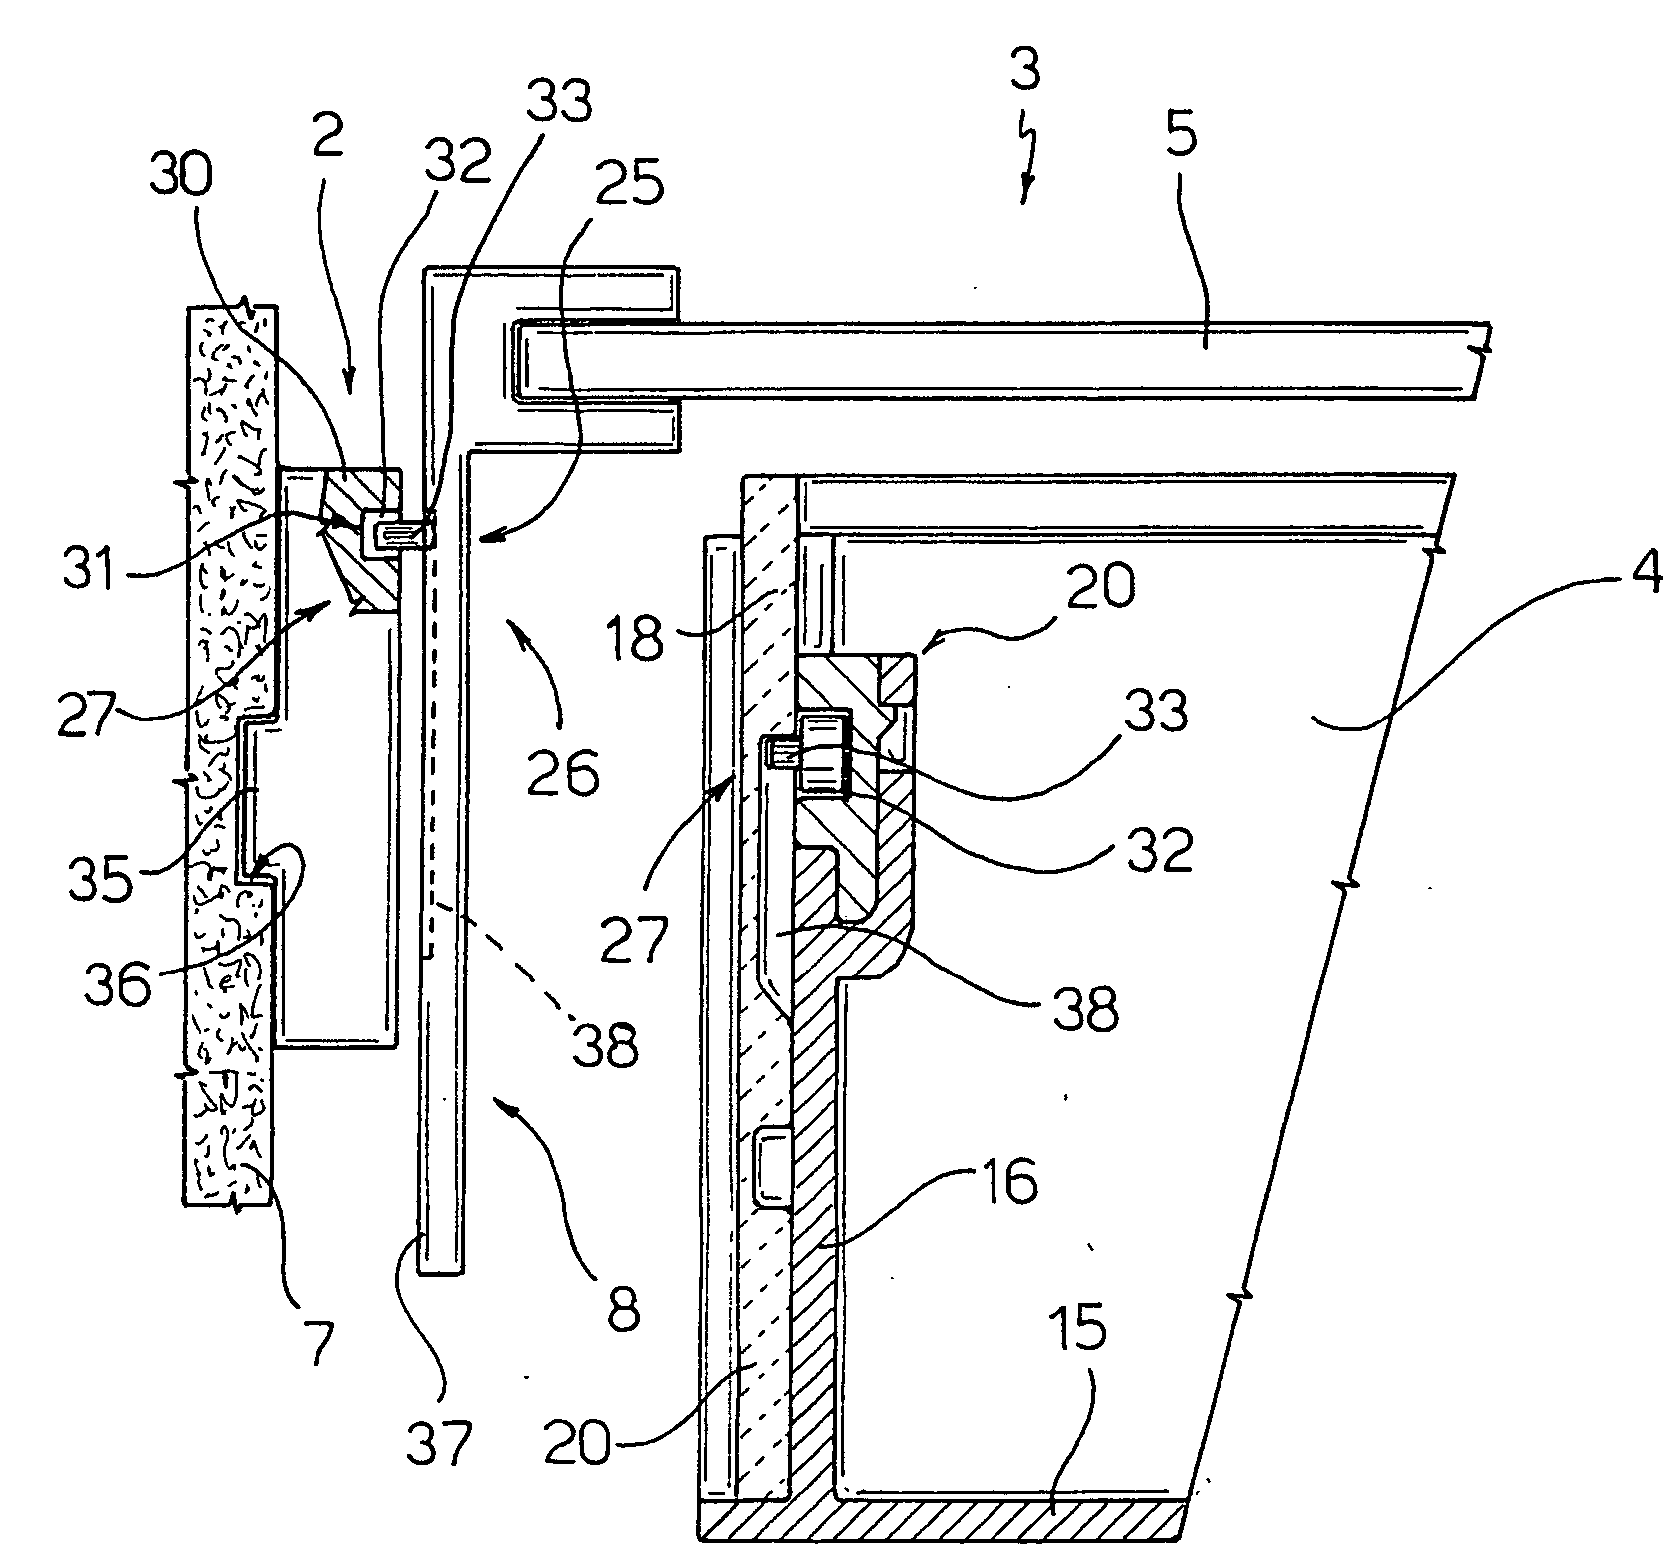 Drawer container device for an electric household appliance, in particular for the fresh food compartment of a refrigerator or freezer